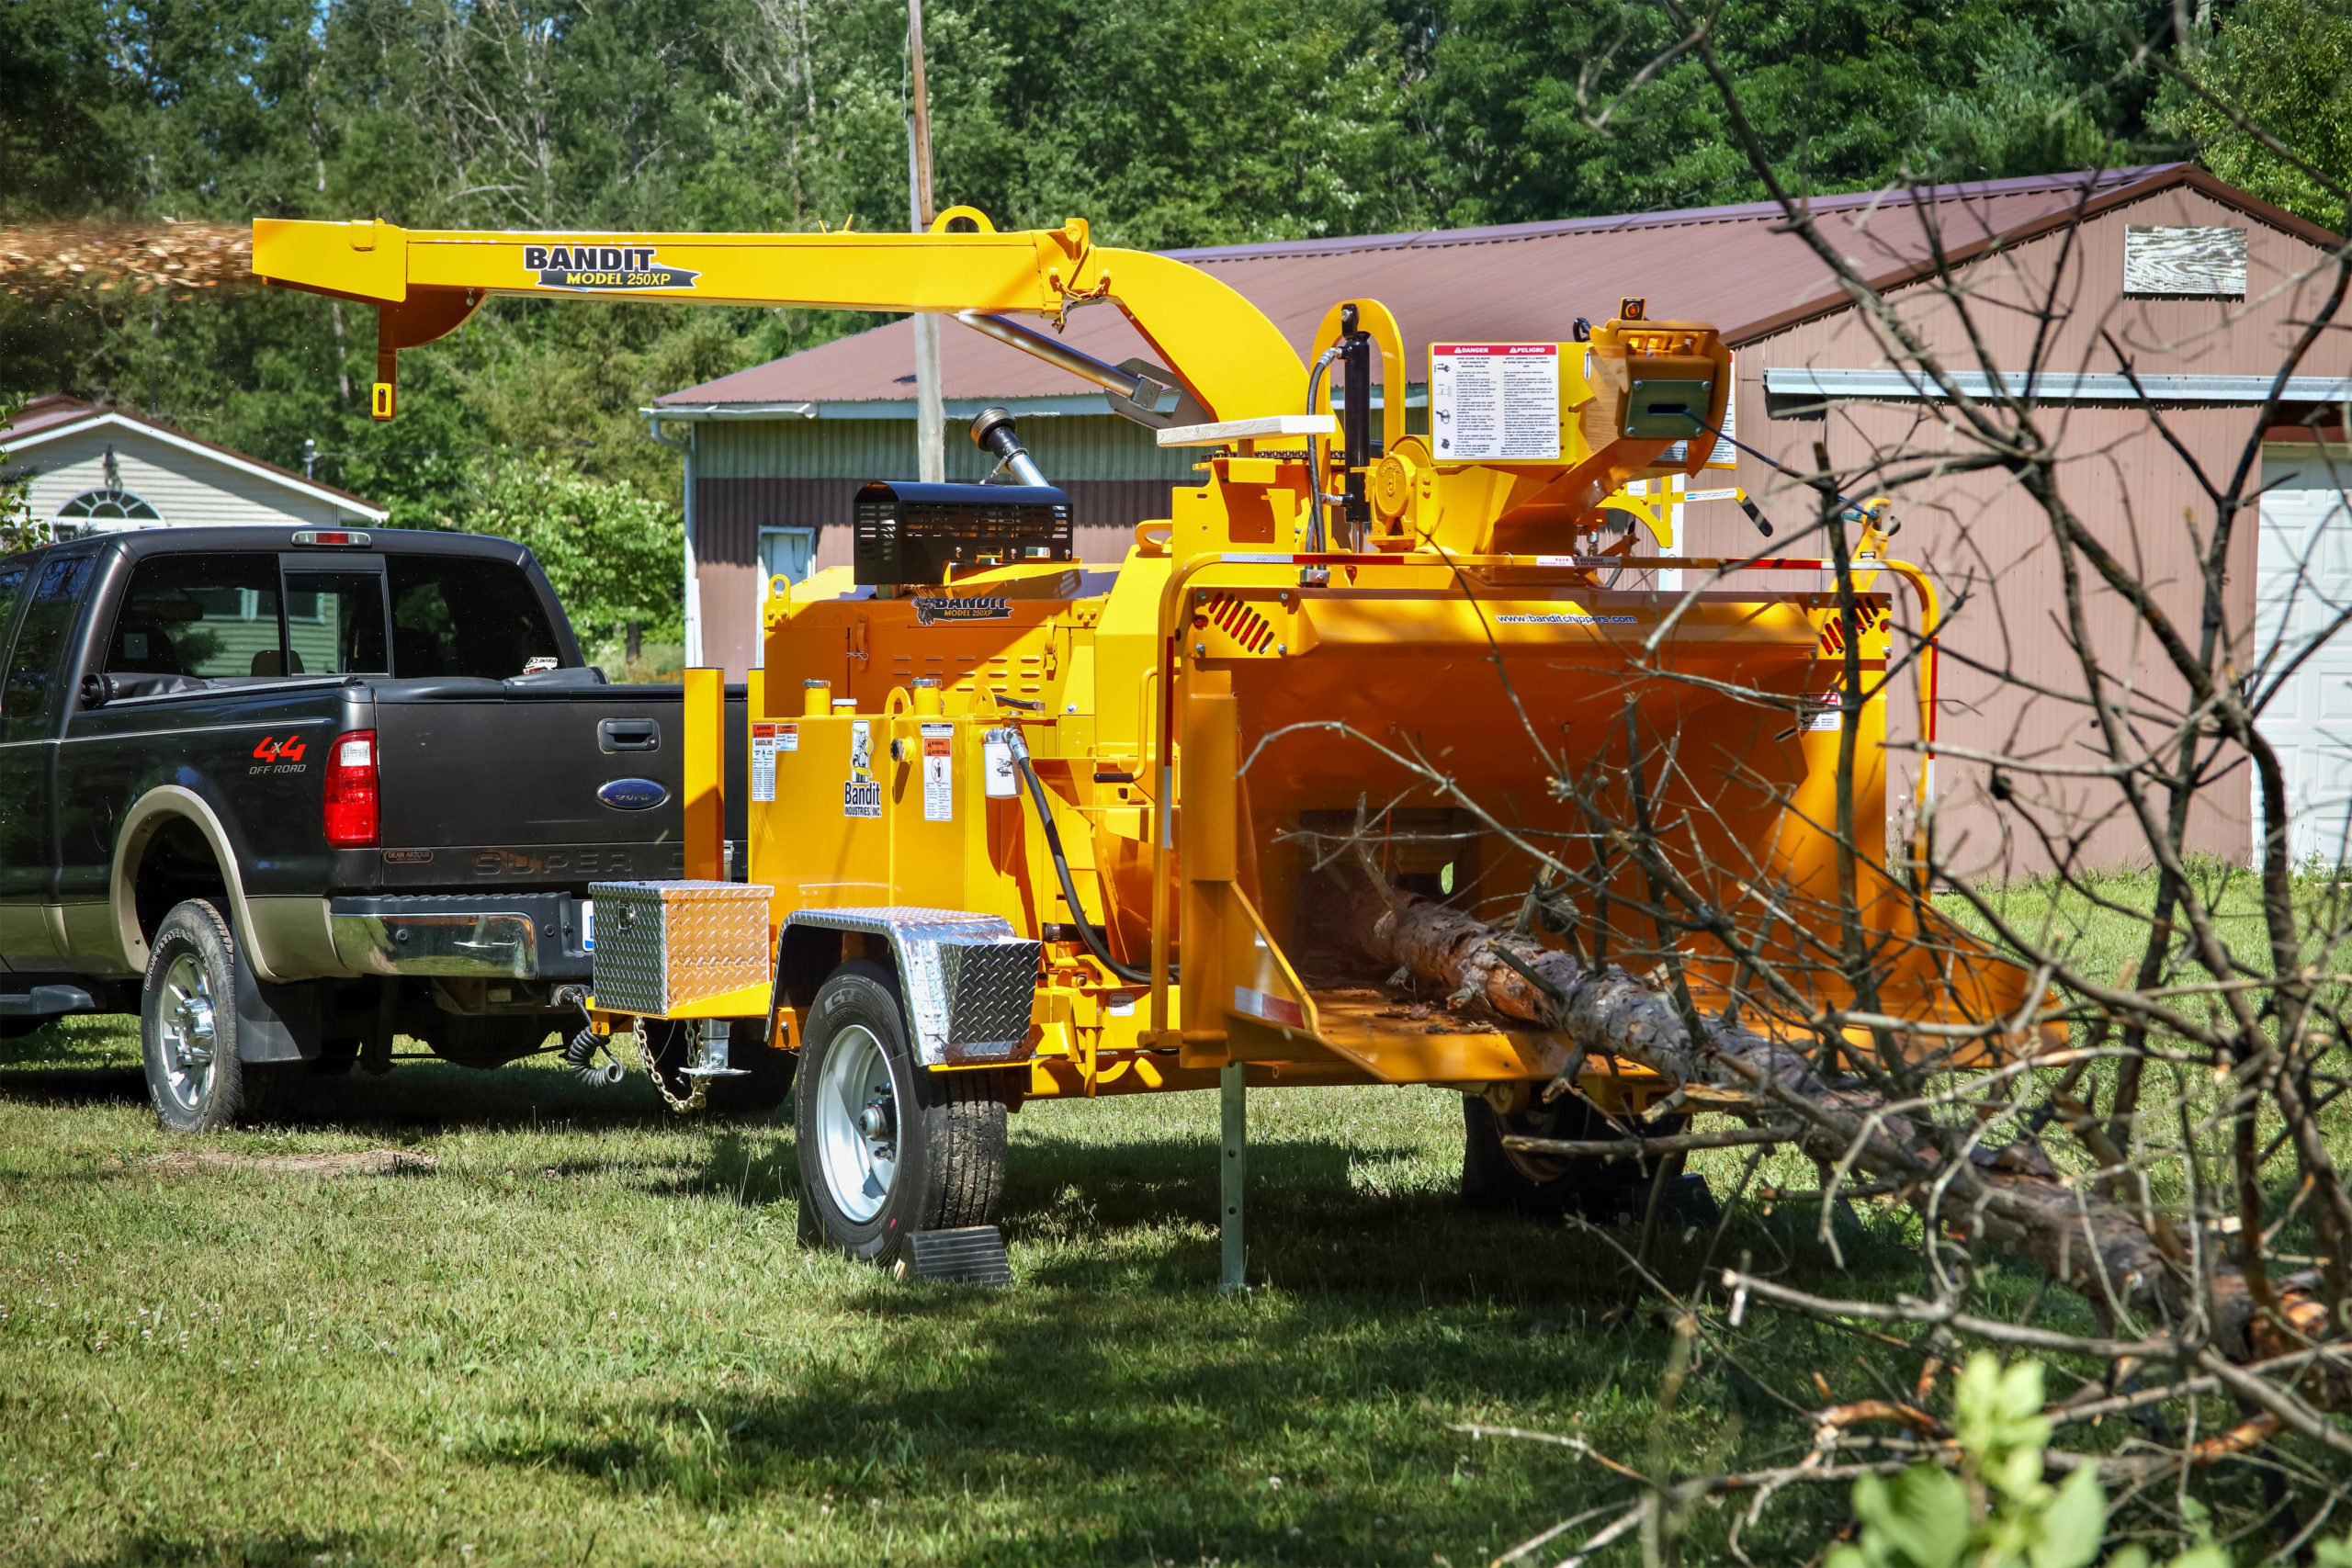 Bandit Hand-Fed Wood Chipper 250XP Iron Source in Delaware